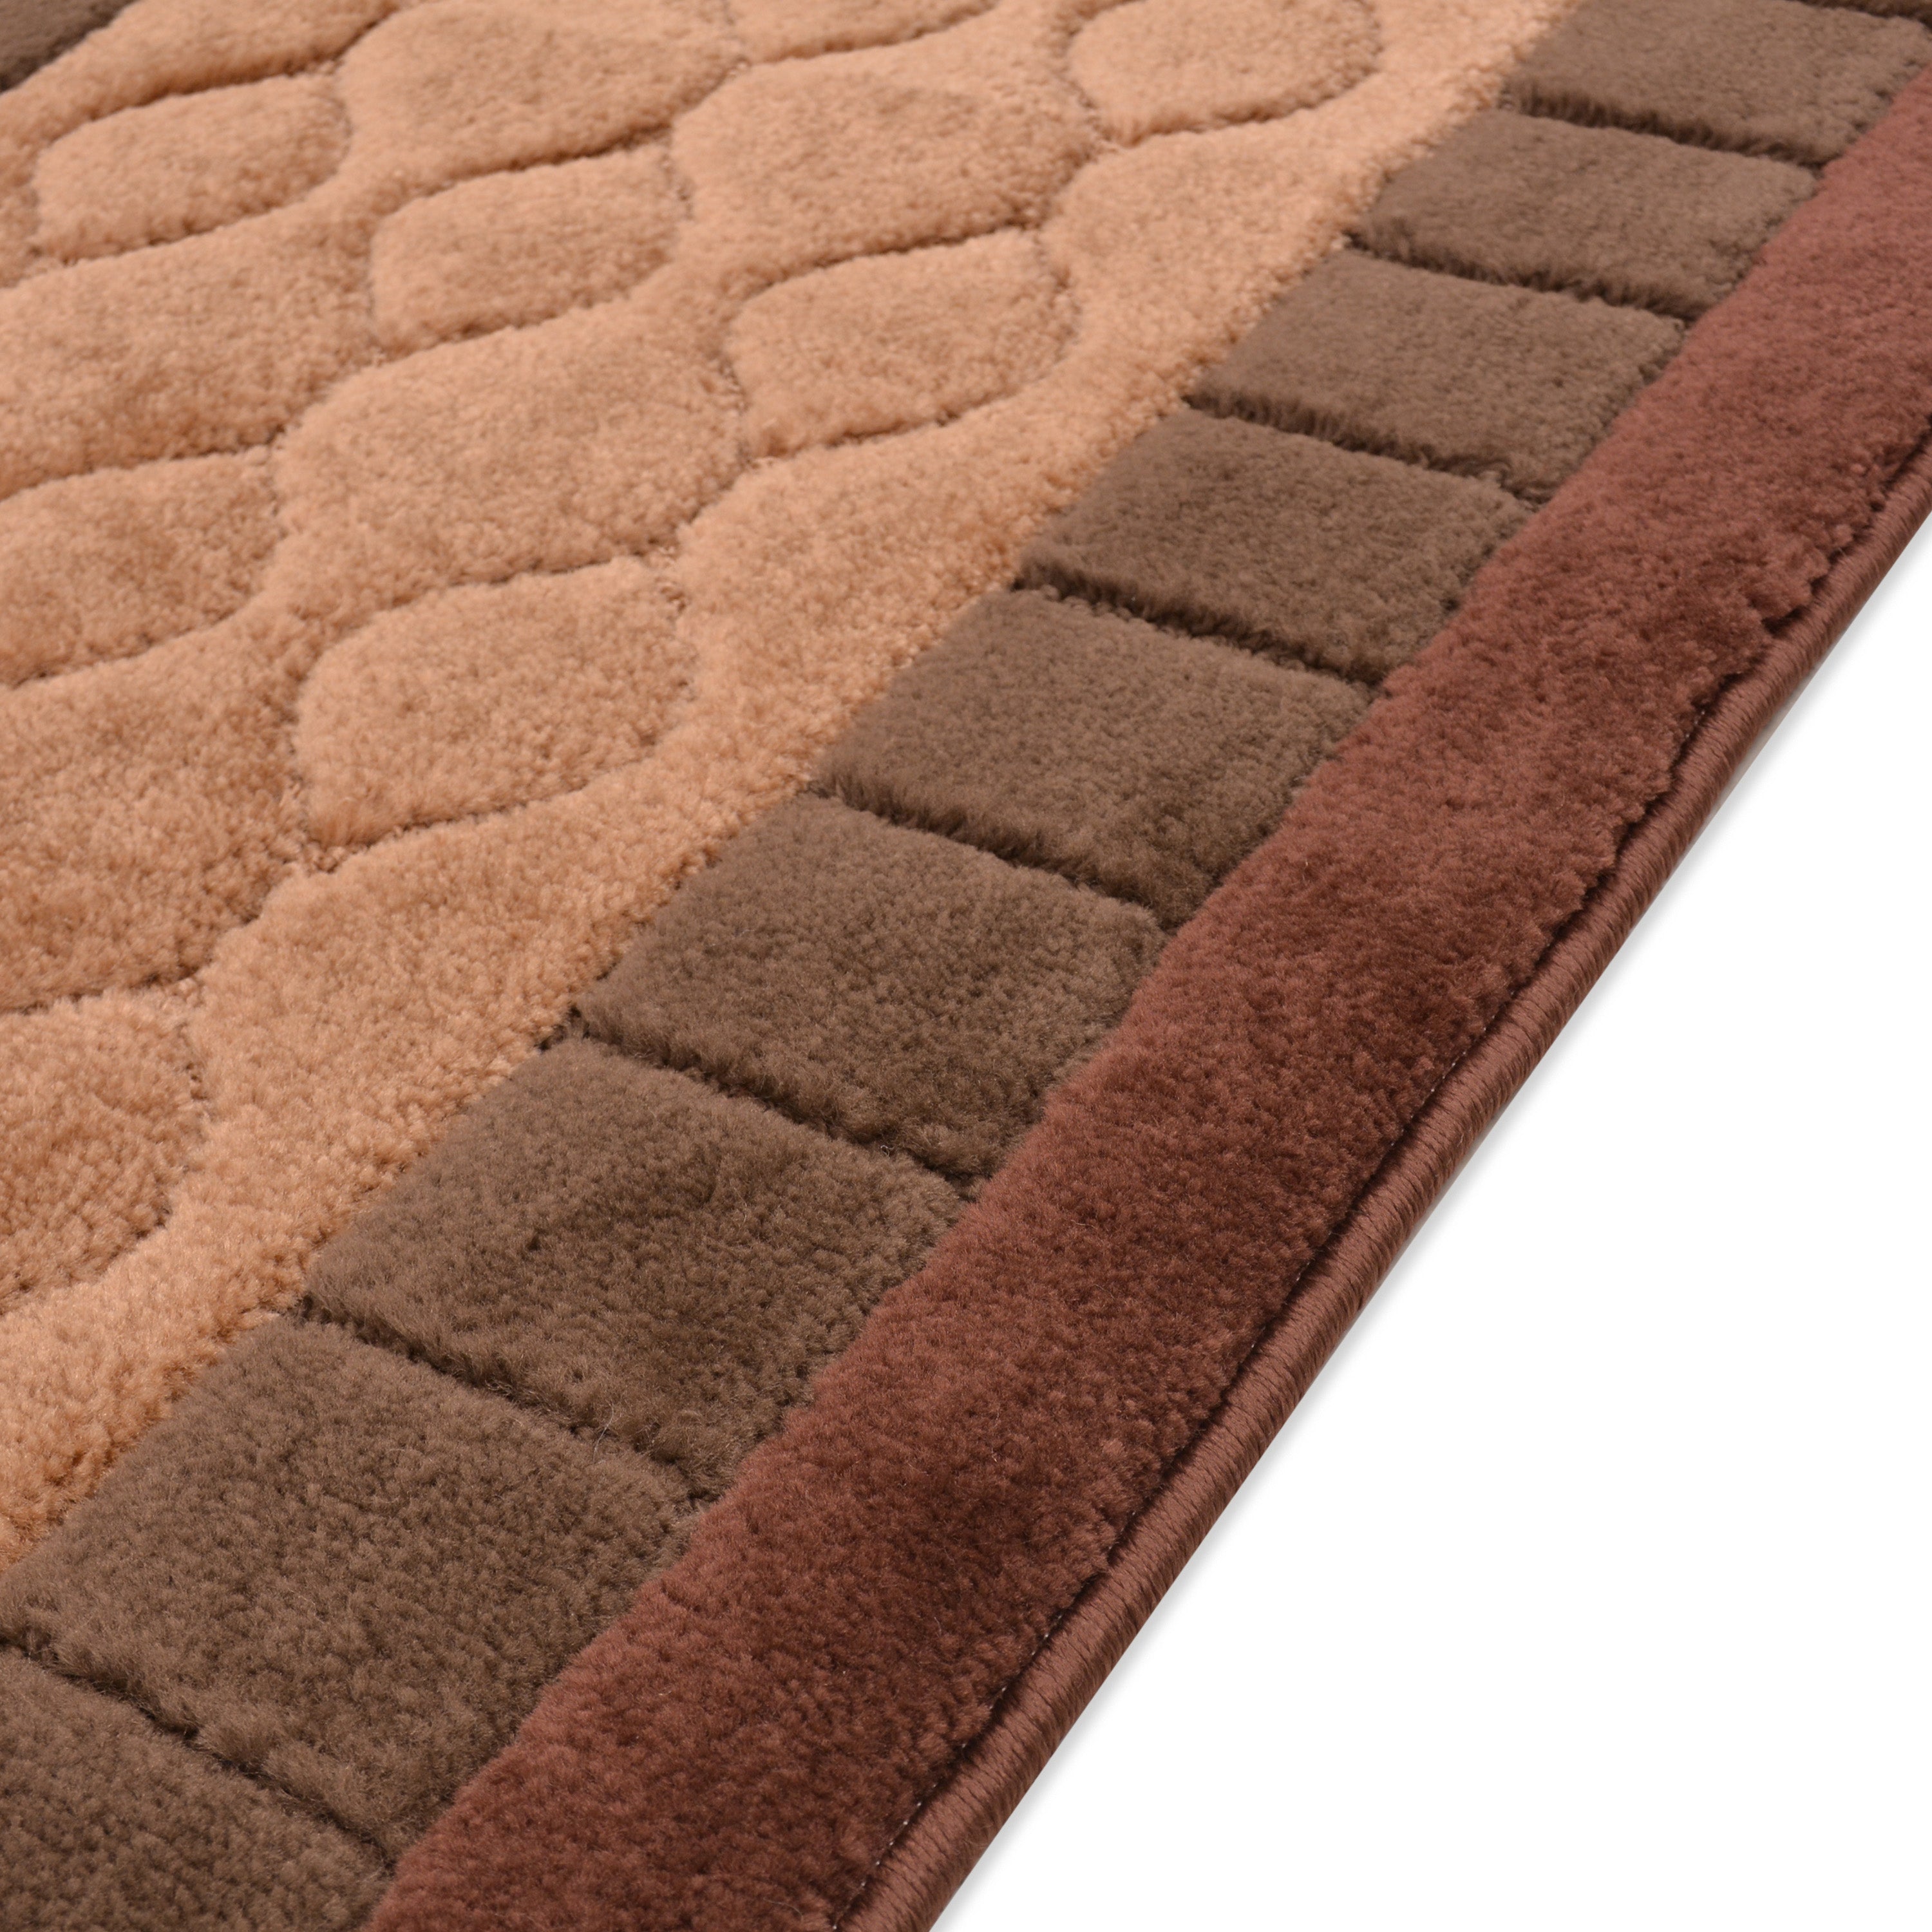 Custom Size Runner Rug Volley Circle Beige-Brown Color Skid Resistant Rug Runner Customize Up to 50 Feet and 26 Inch Width Cut to Size Rugs-7